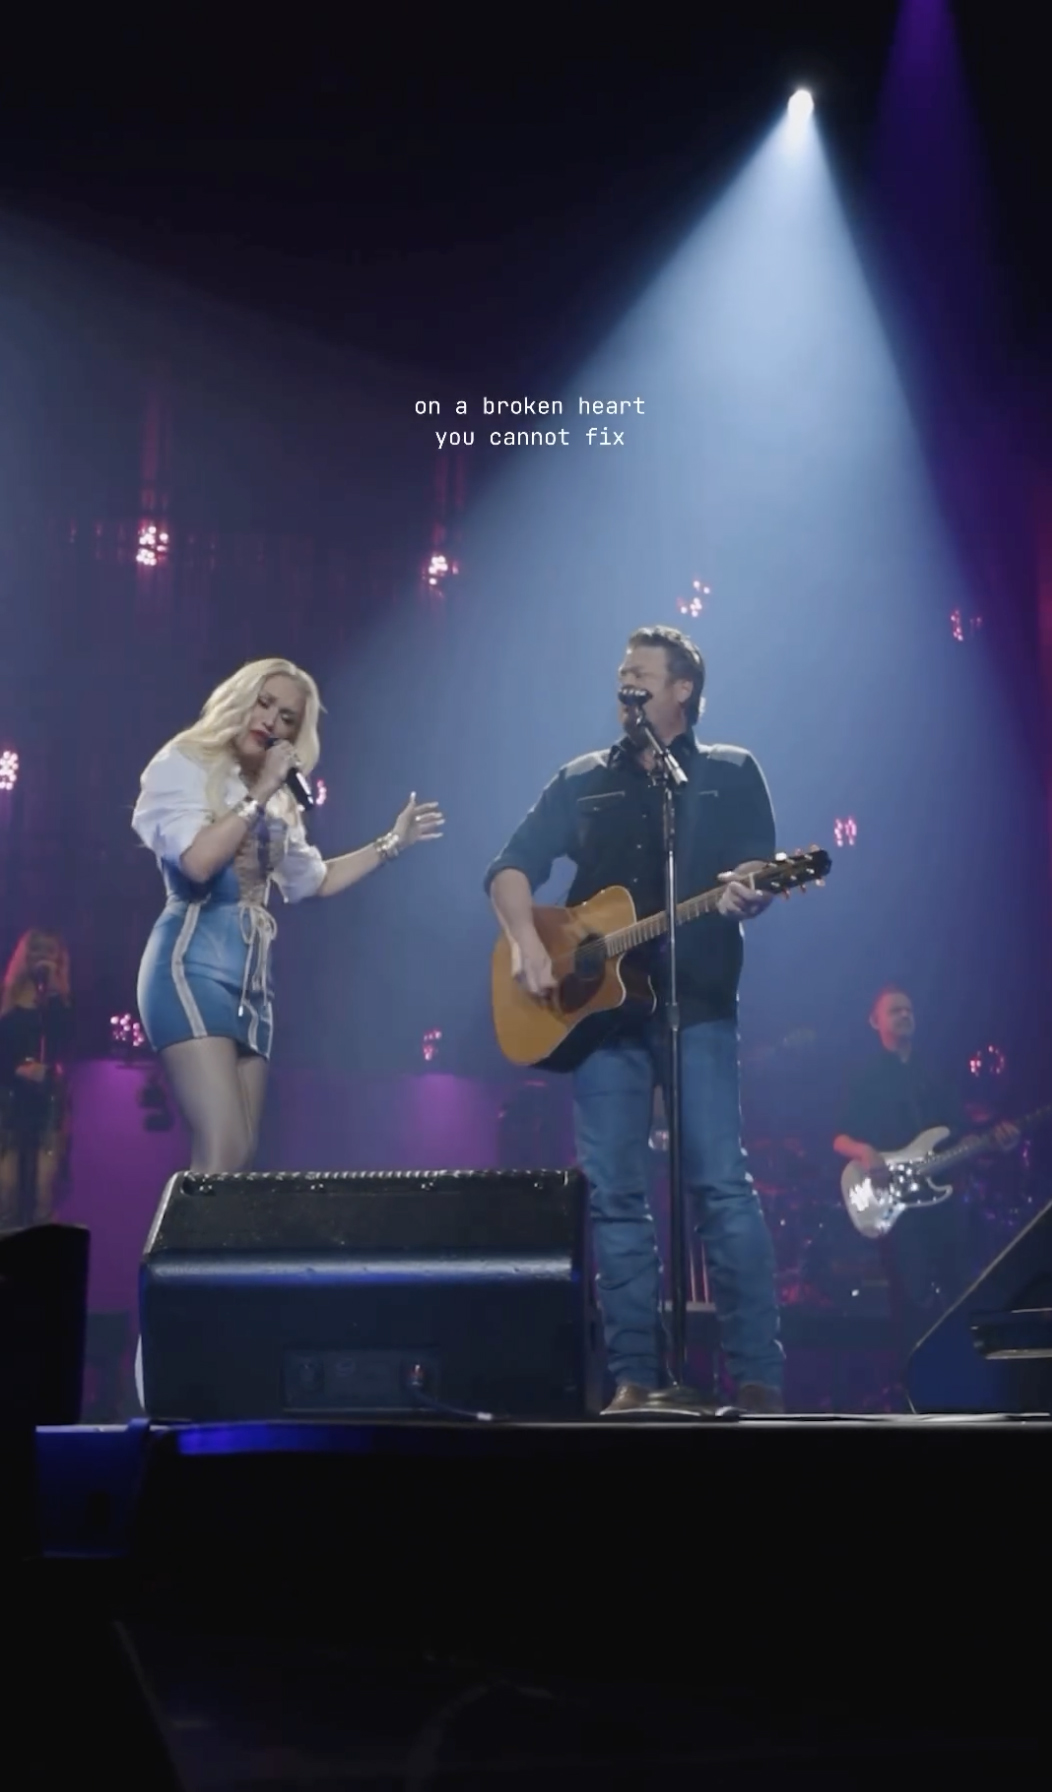 Blake Shelton shared a video of his duet performance with Gwen